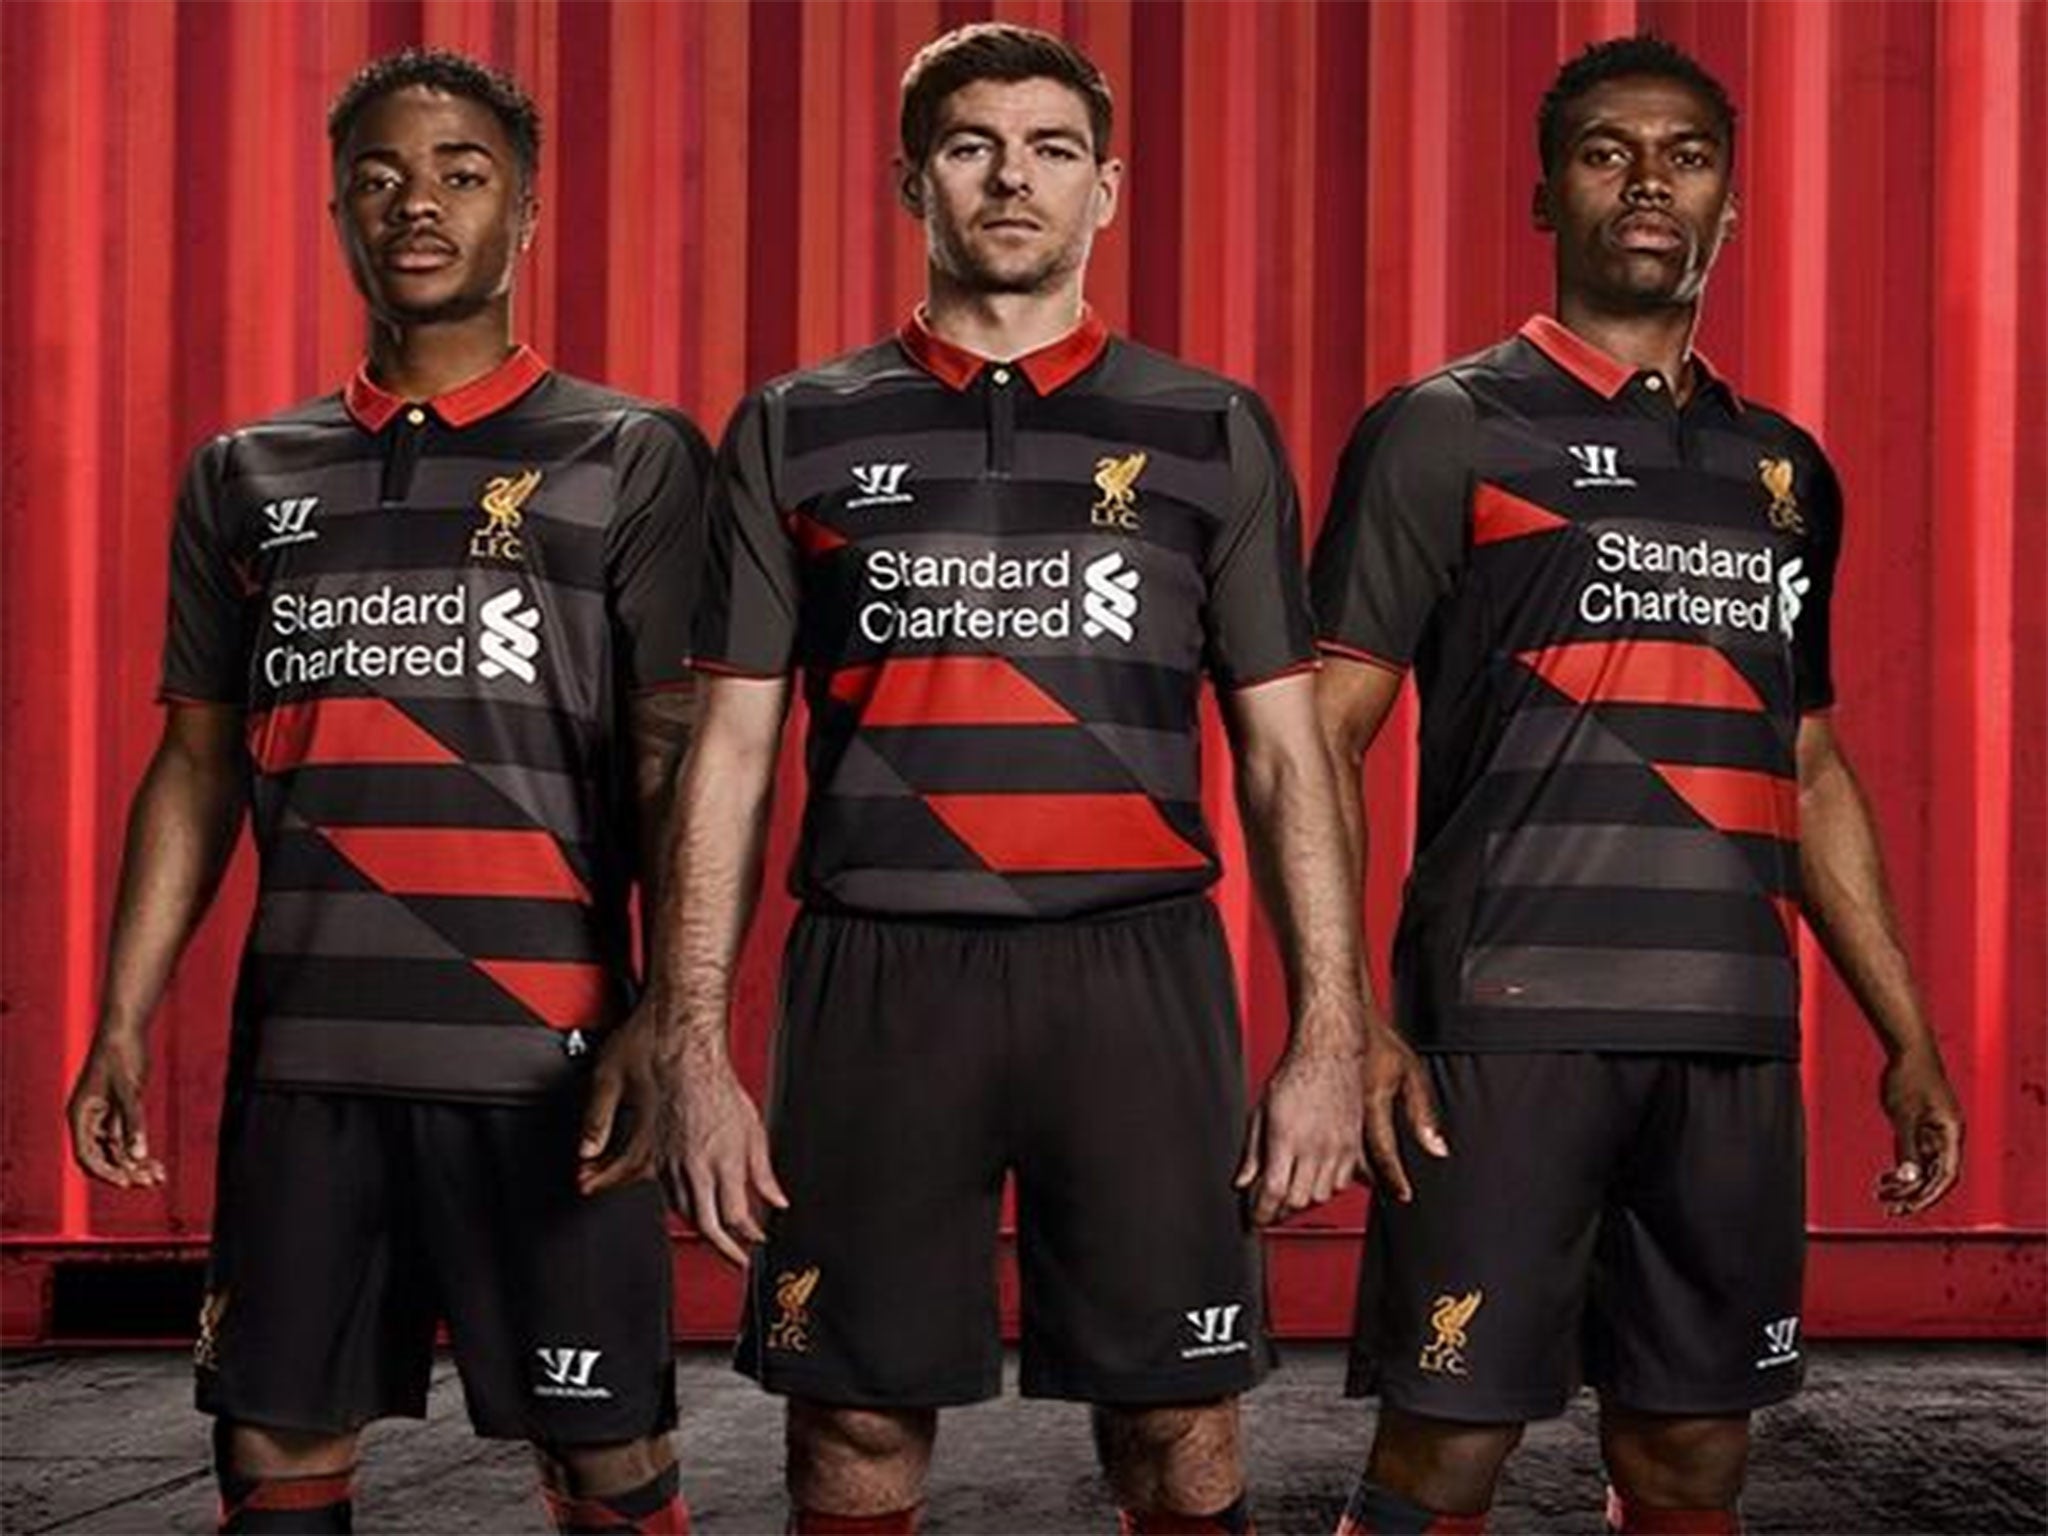 Liverpool have unveiled their new third kit for the 2014/15 season